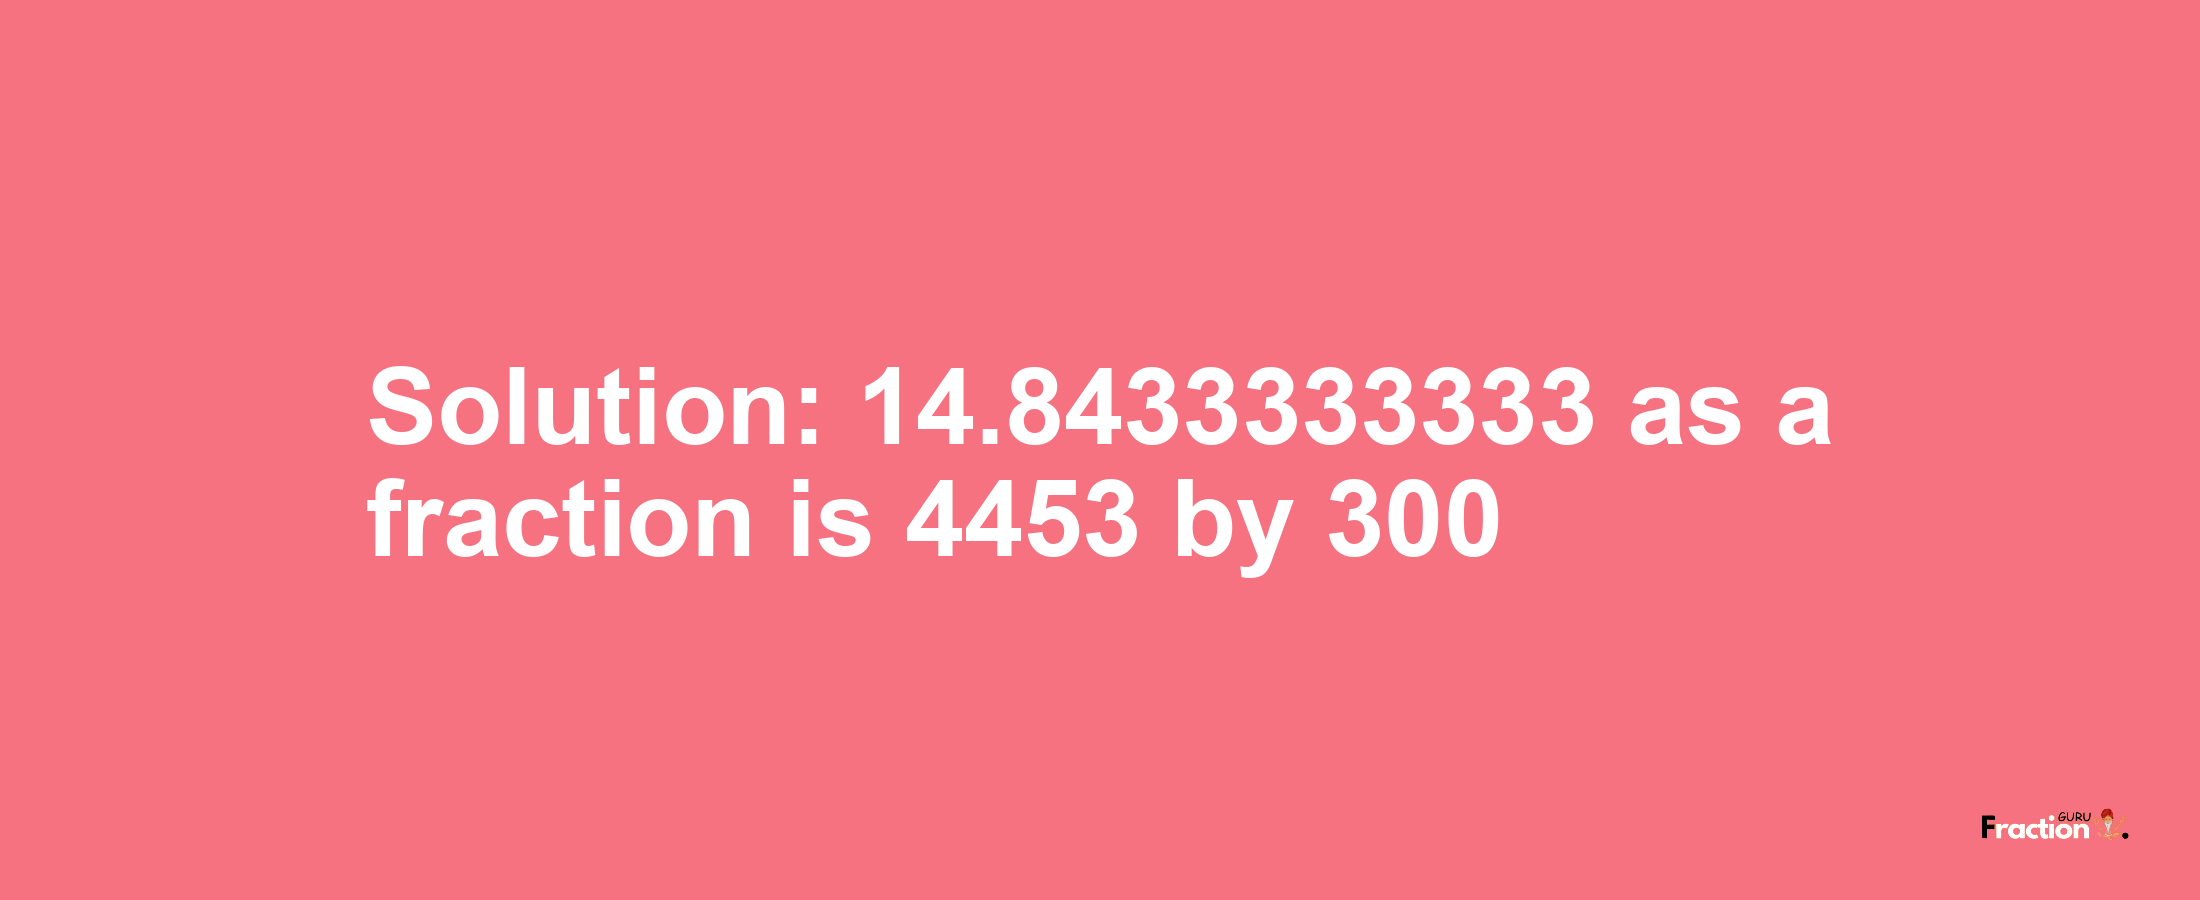 Solution:14.8433333333 as a fraction is 4453/300